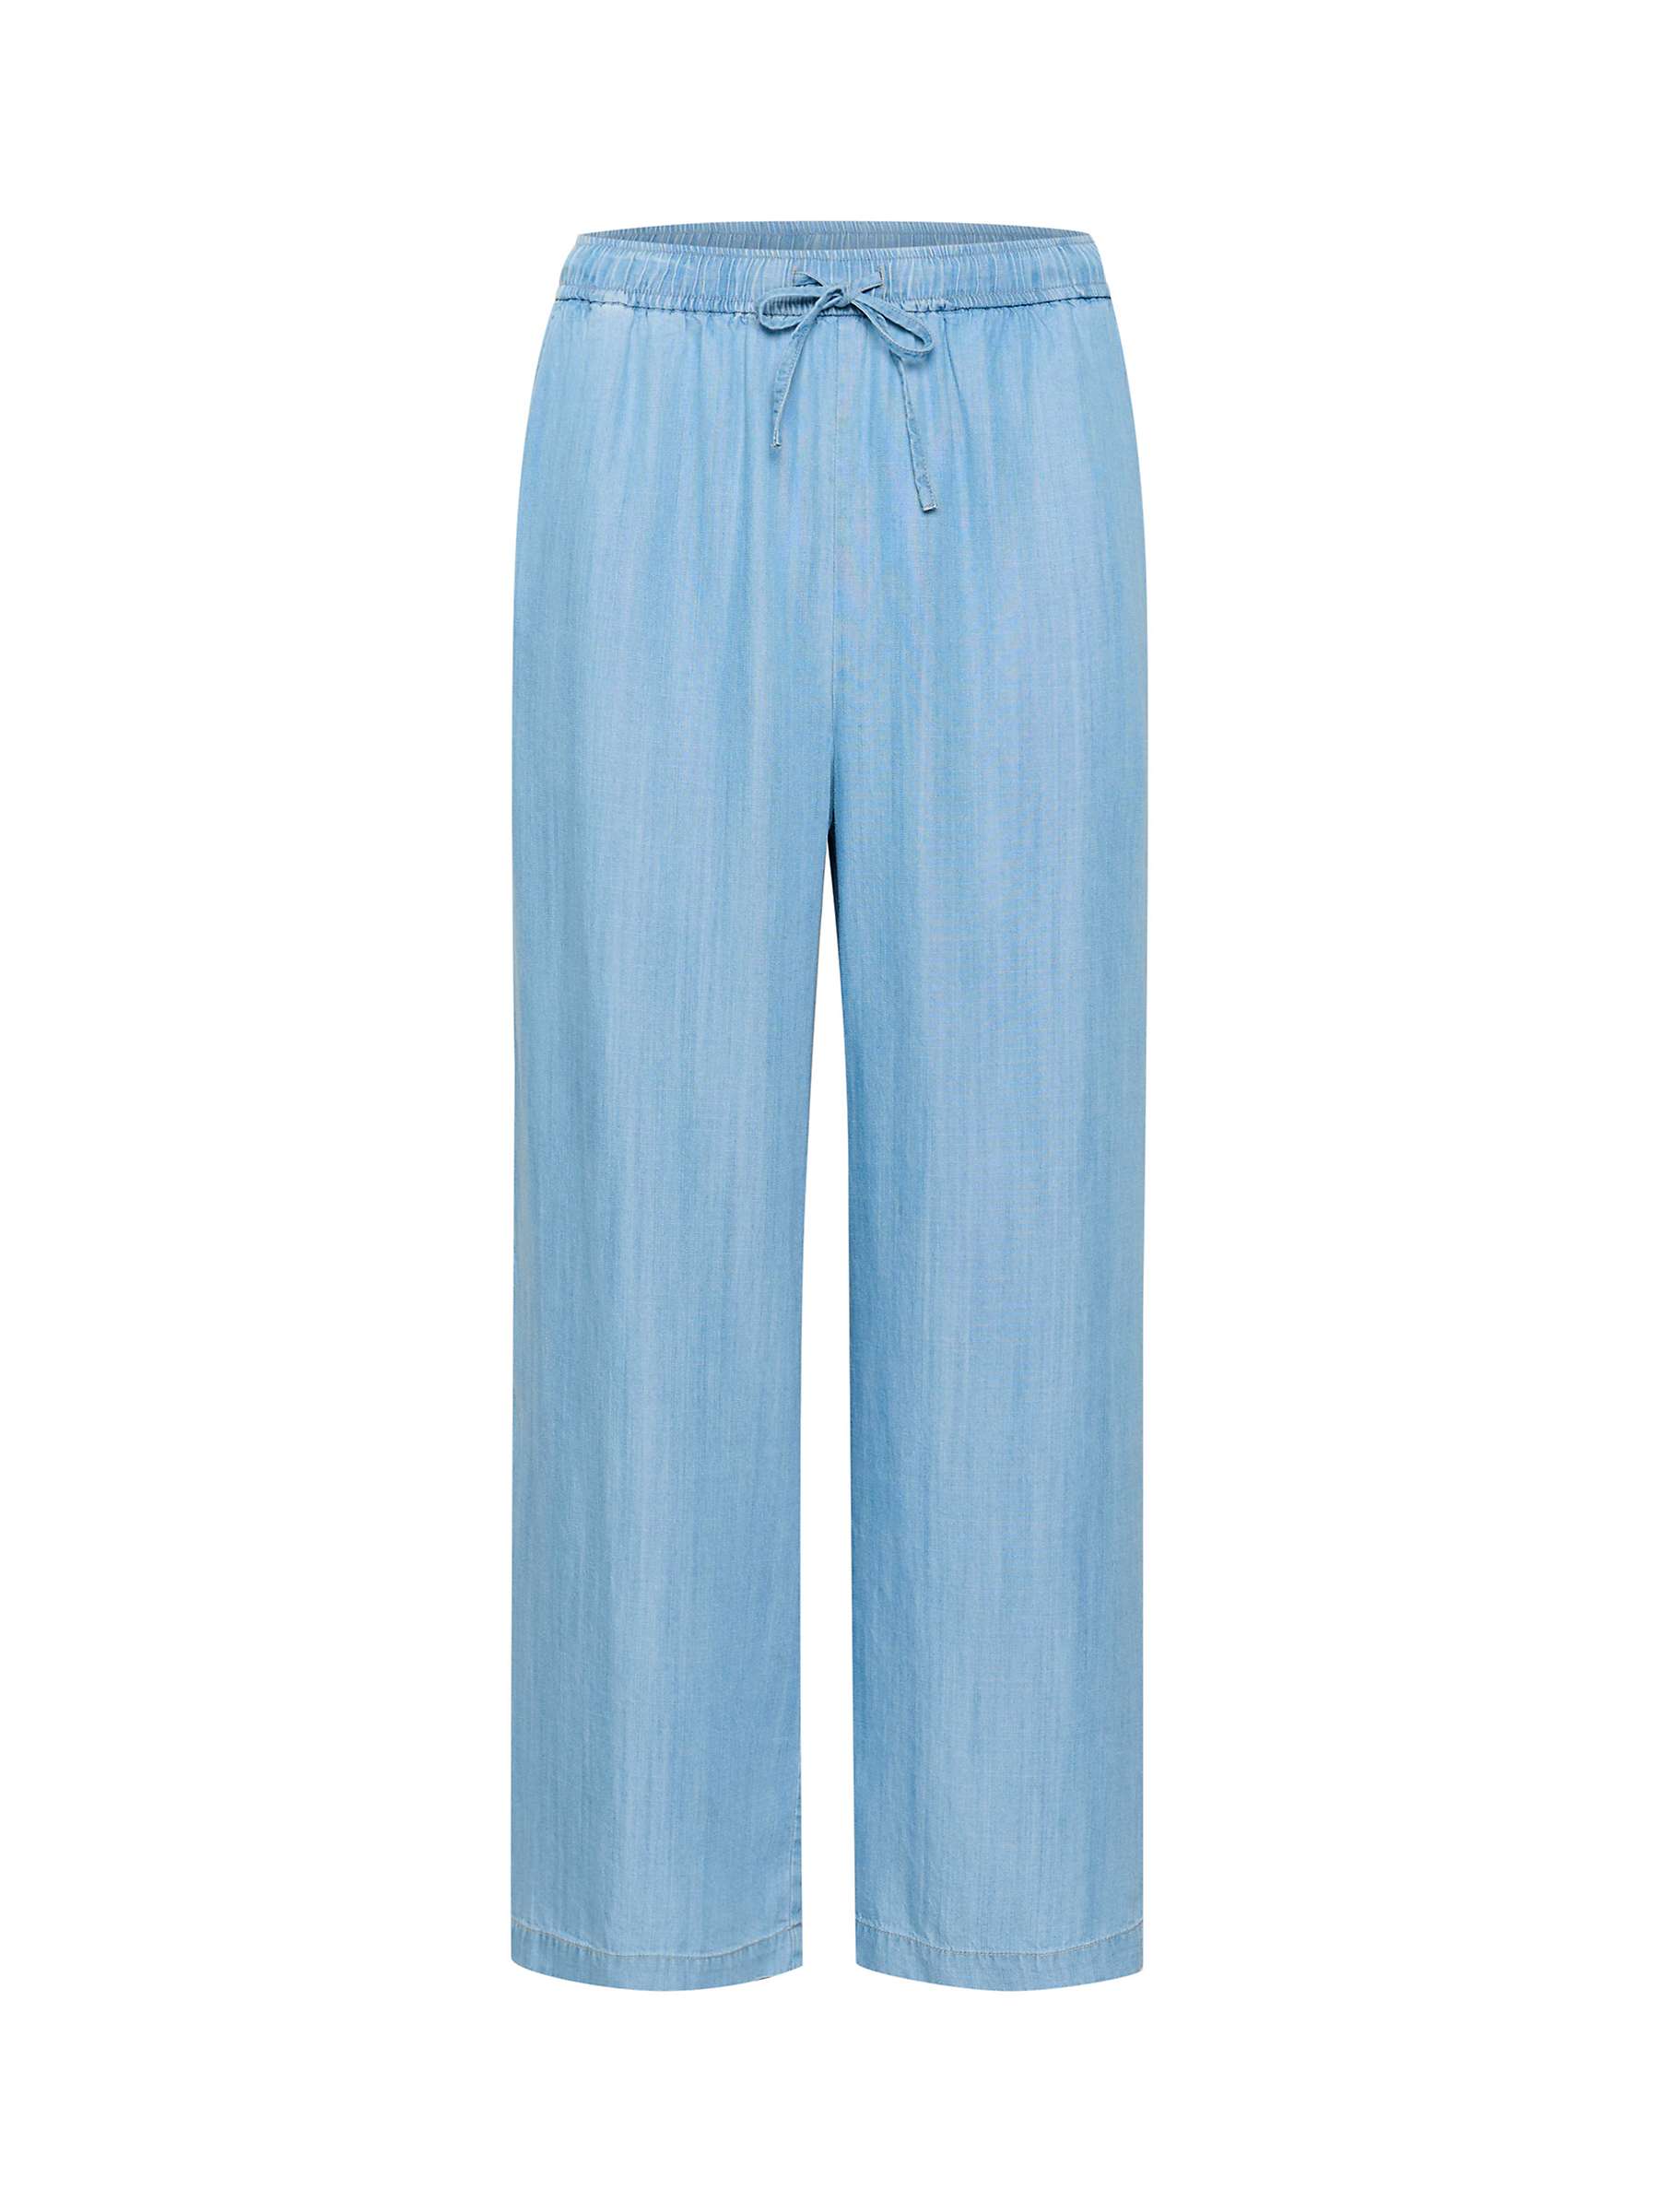 Buy Part Two Cibells Cropped Wide Leg Trousers, Medium Blue Online at johnlewis.com